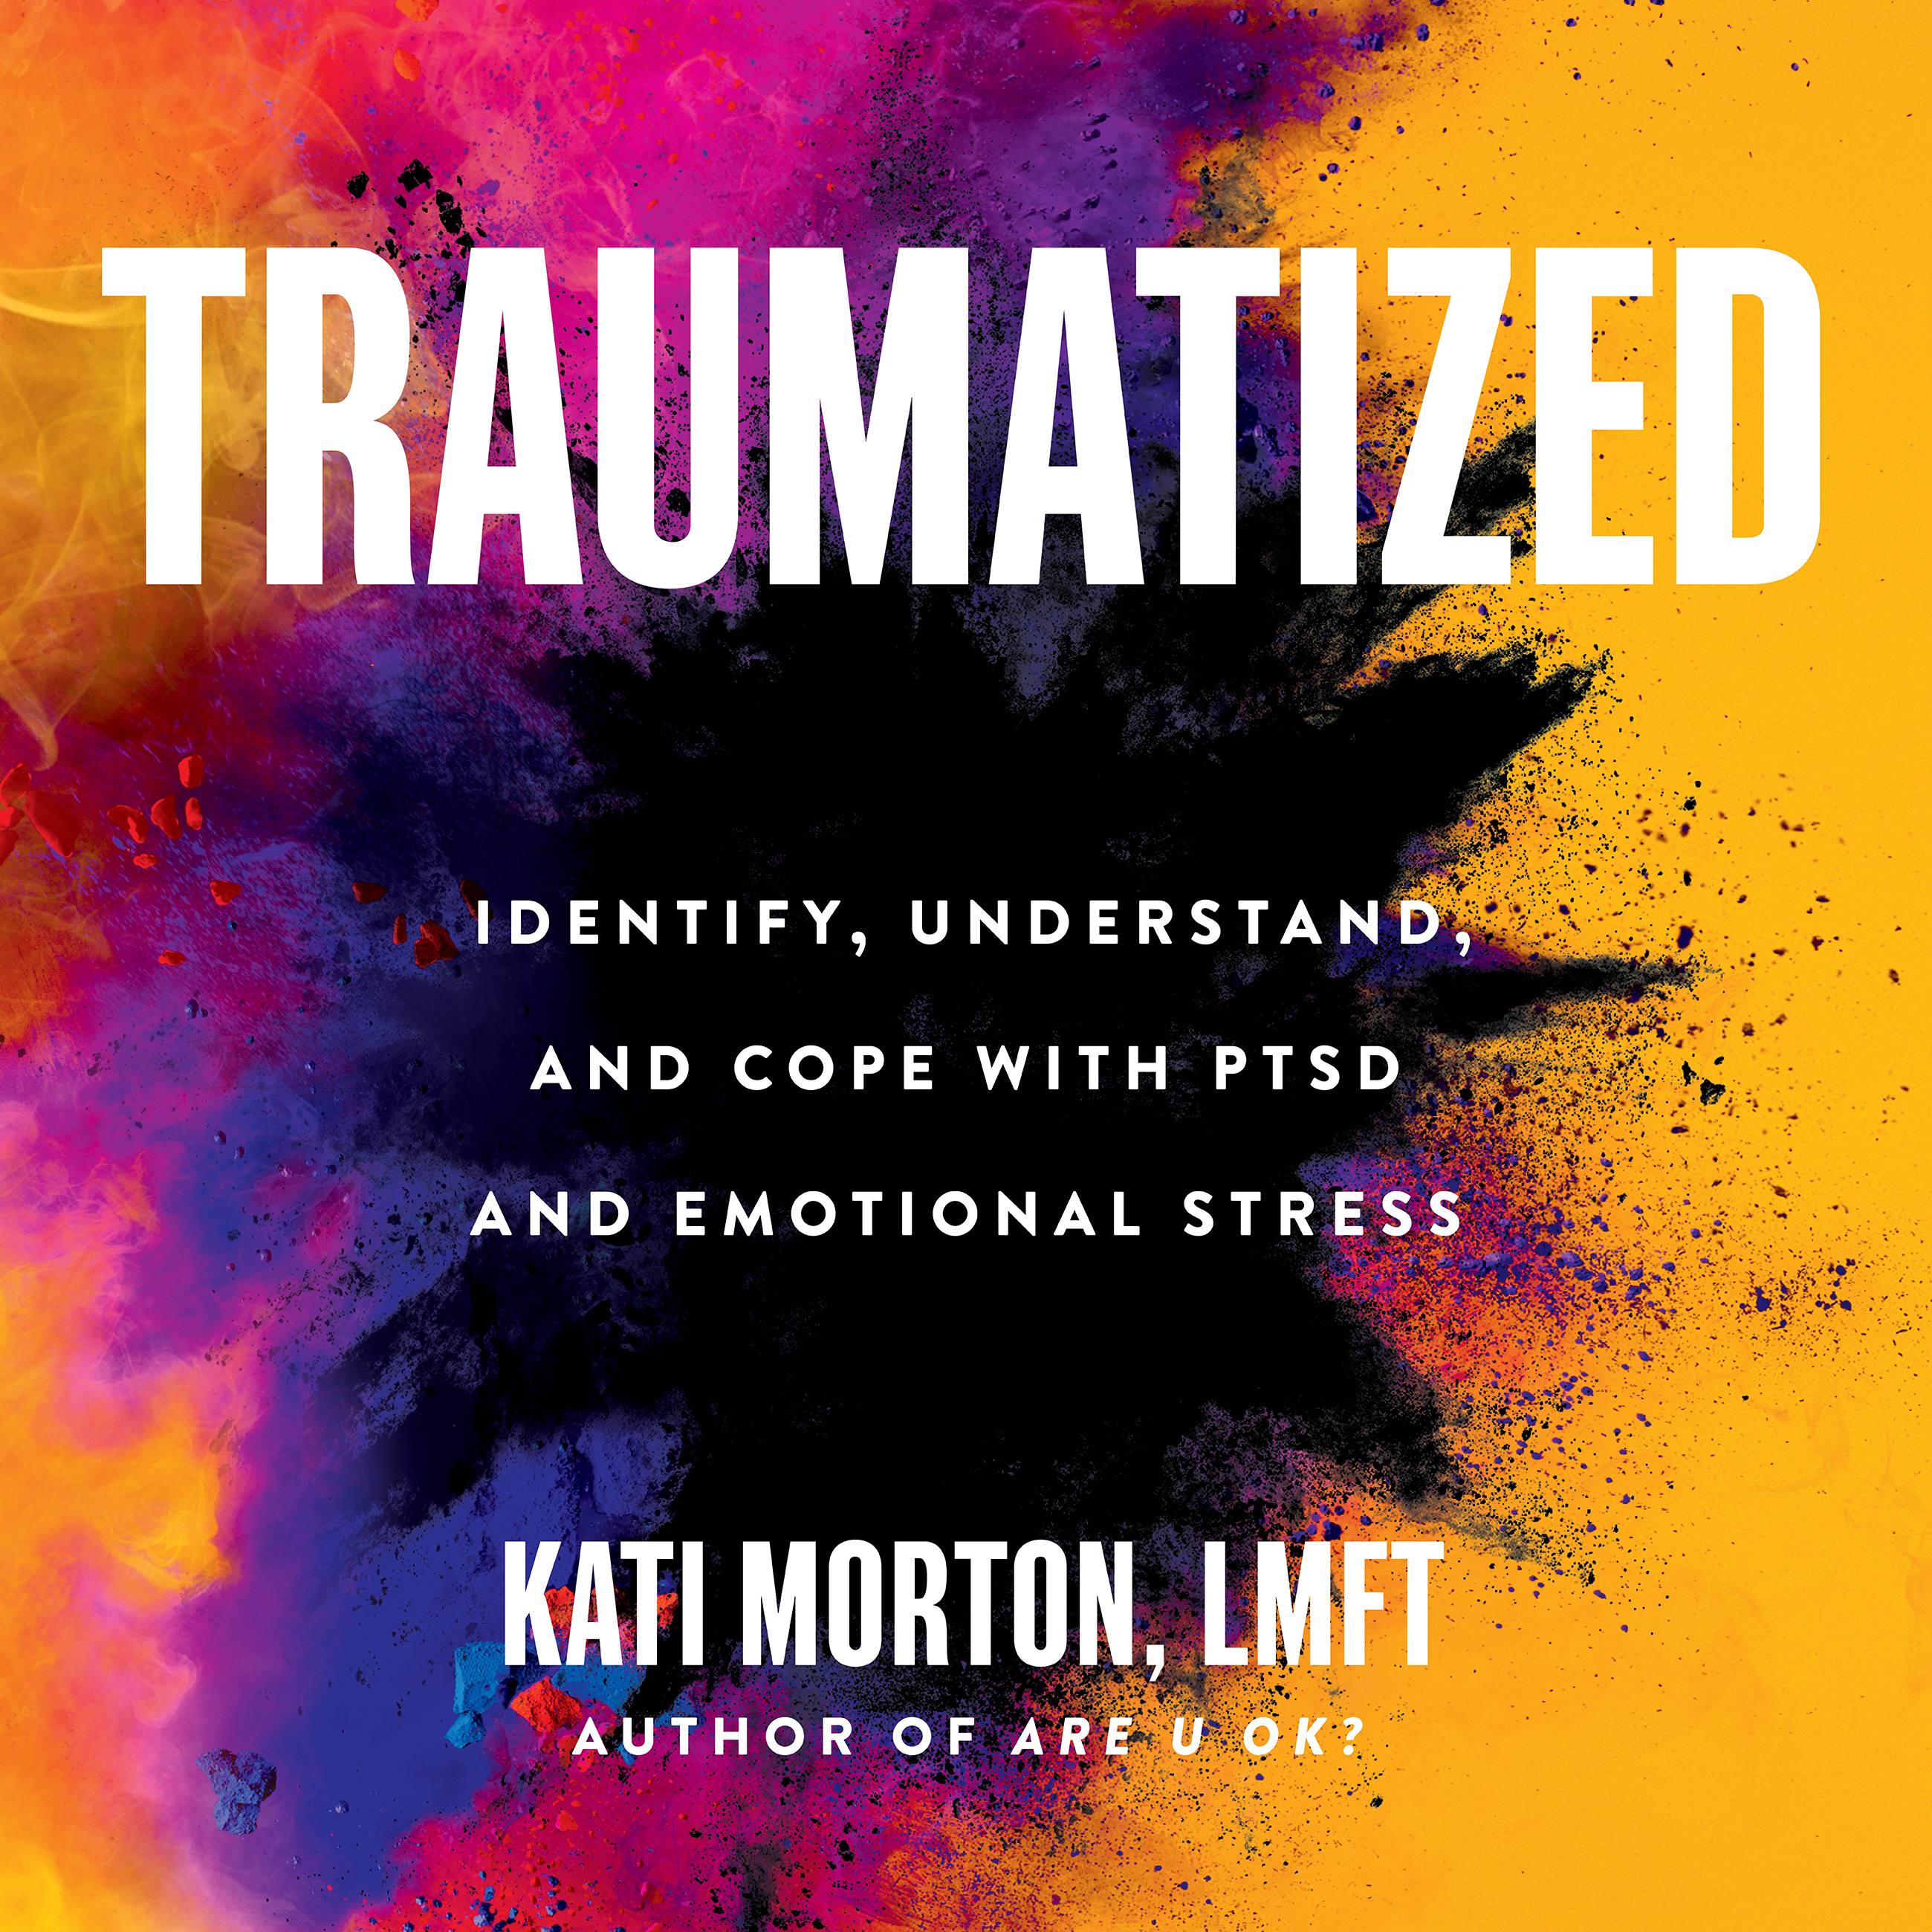 What Is a “Little t” Trauma? – New Harbinger Publications, Inc